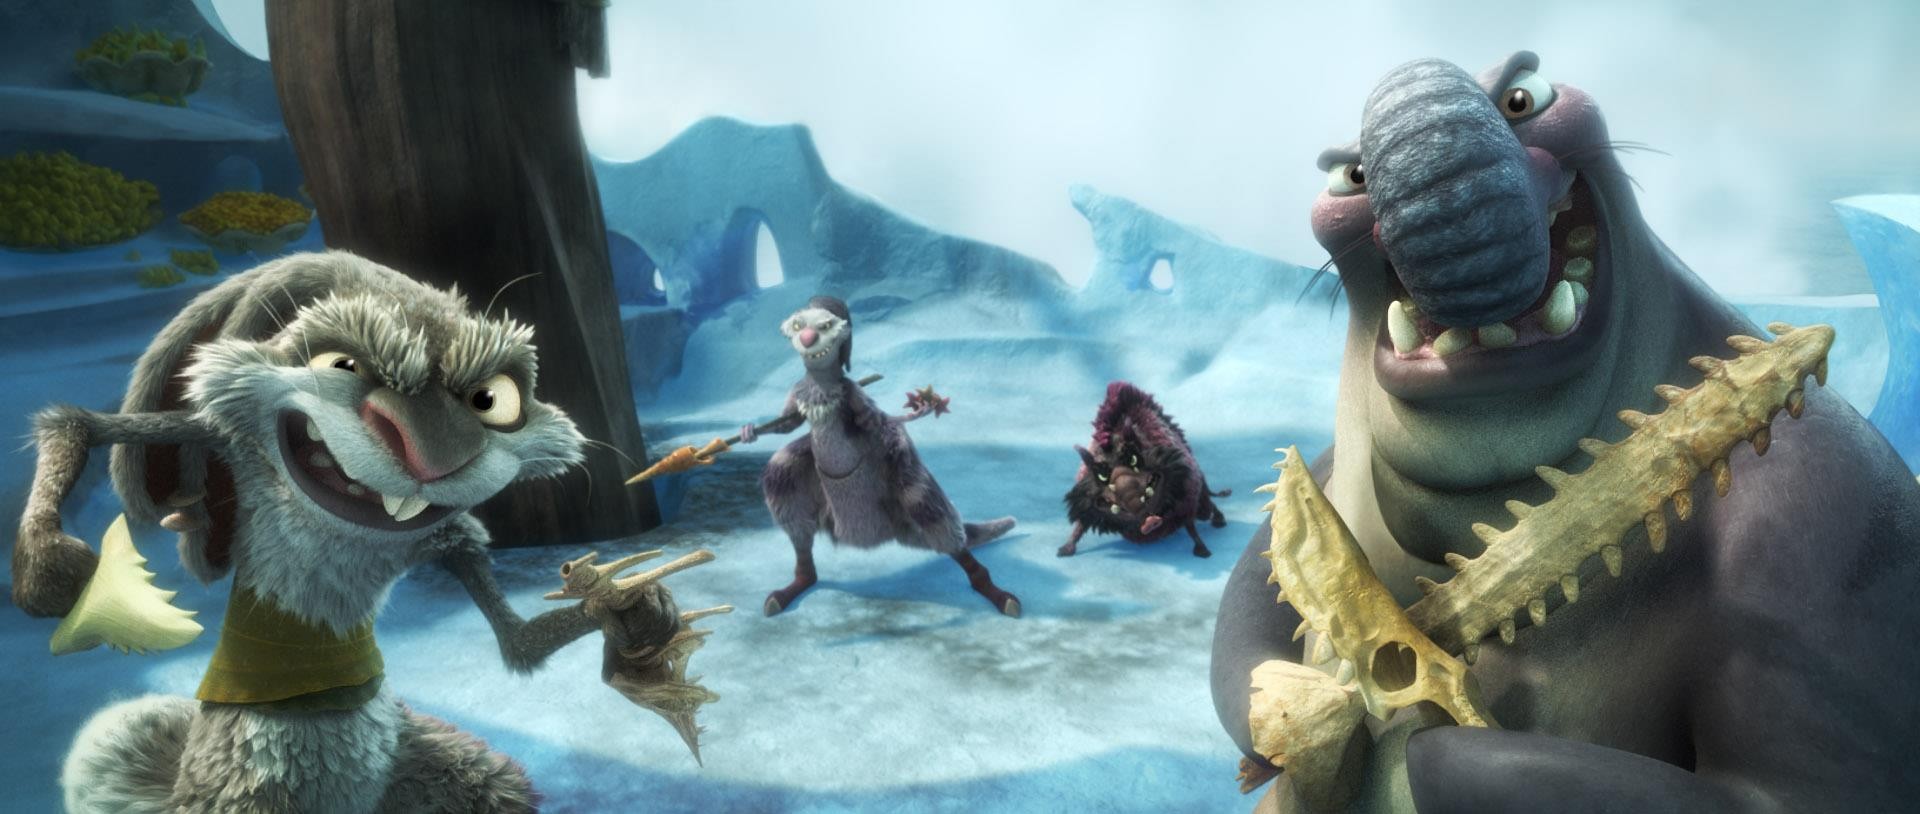 Squint, Raz and Flynn from 20th Century Fox's Ice Age: Continental Drift (2012)